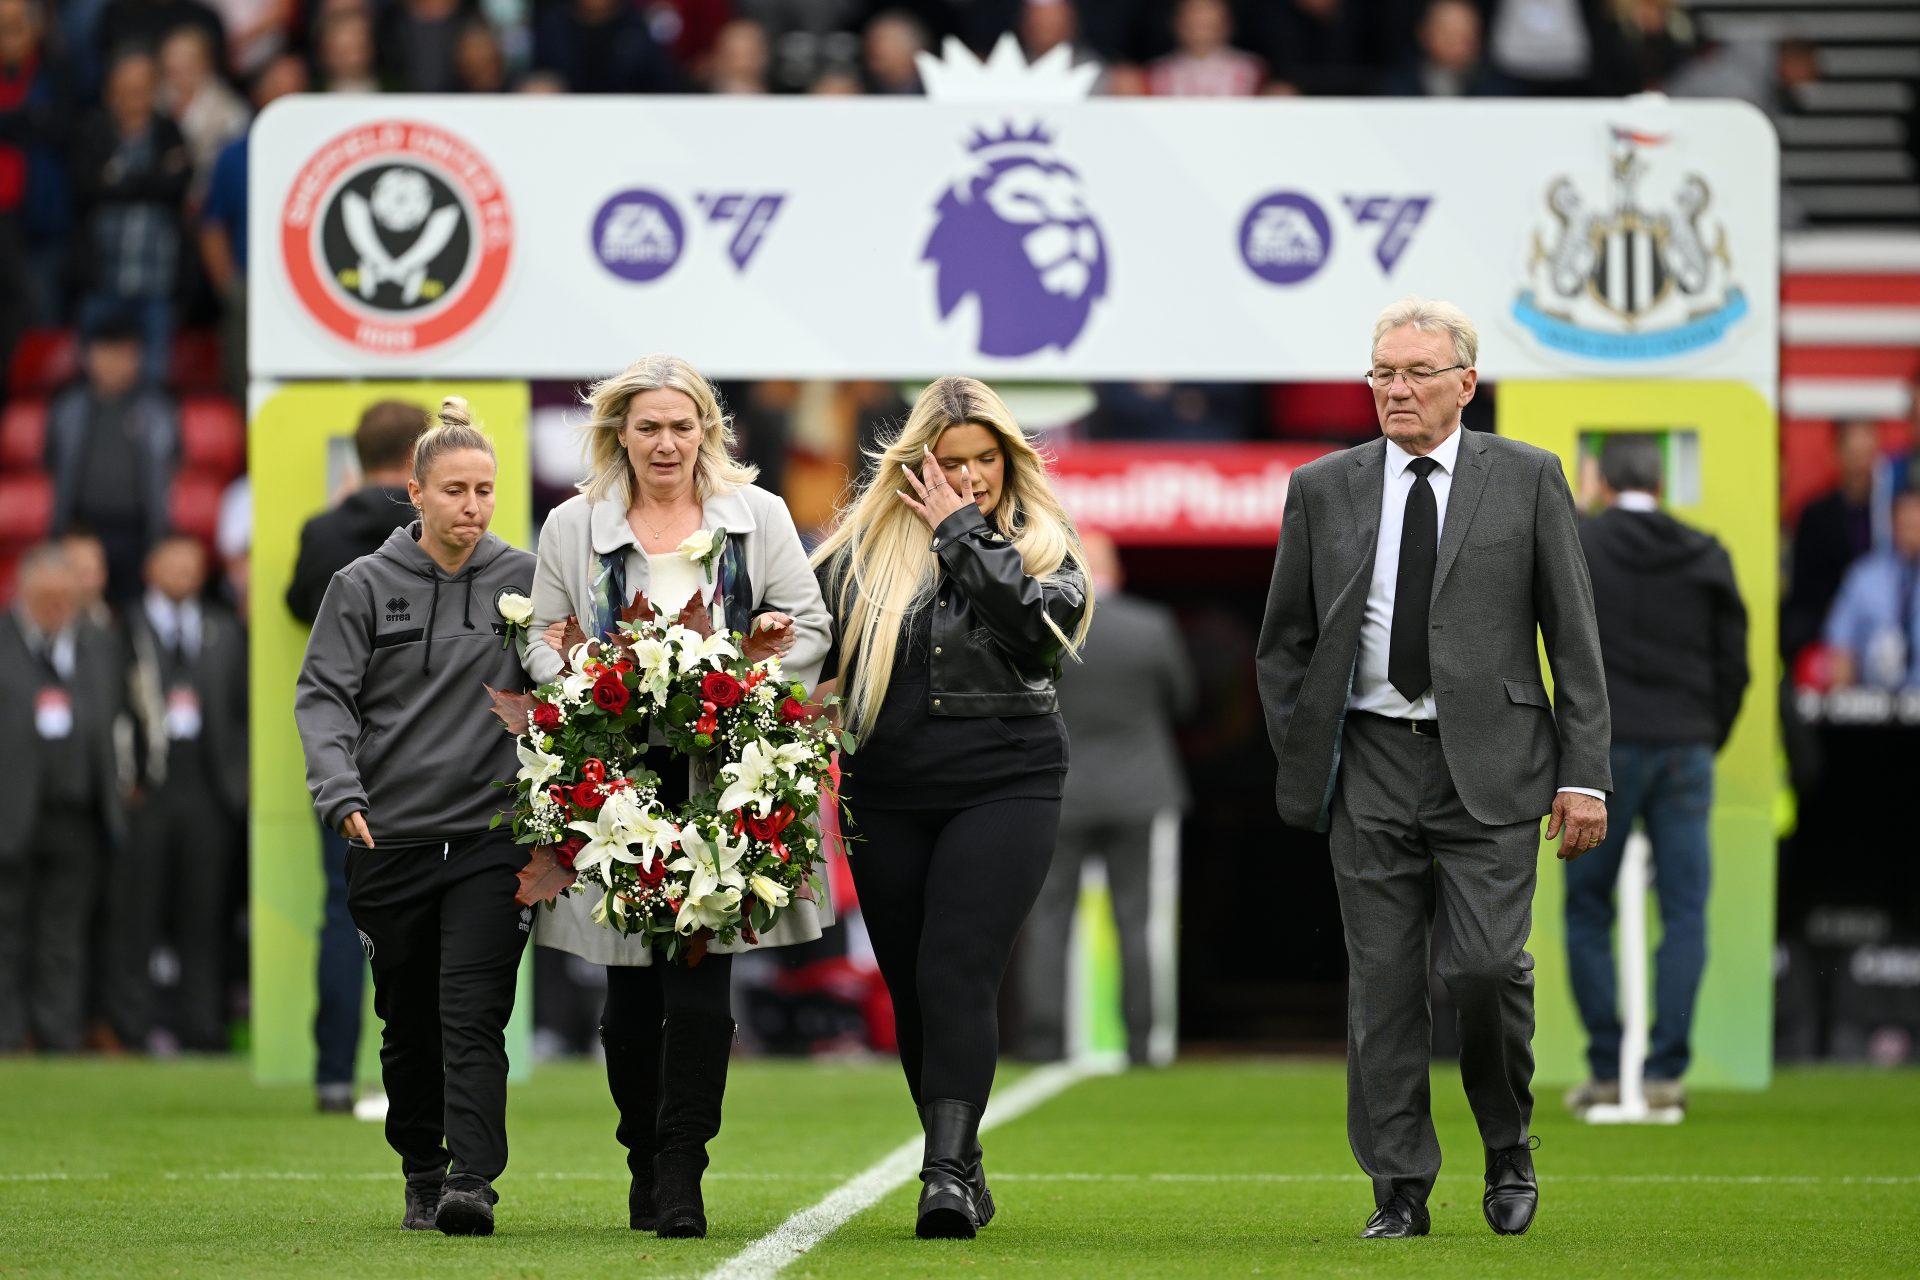 Sheffield United honour Maddy Cusack with emotional pre-match tribute